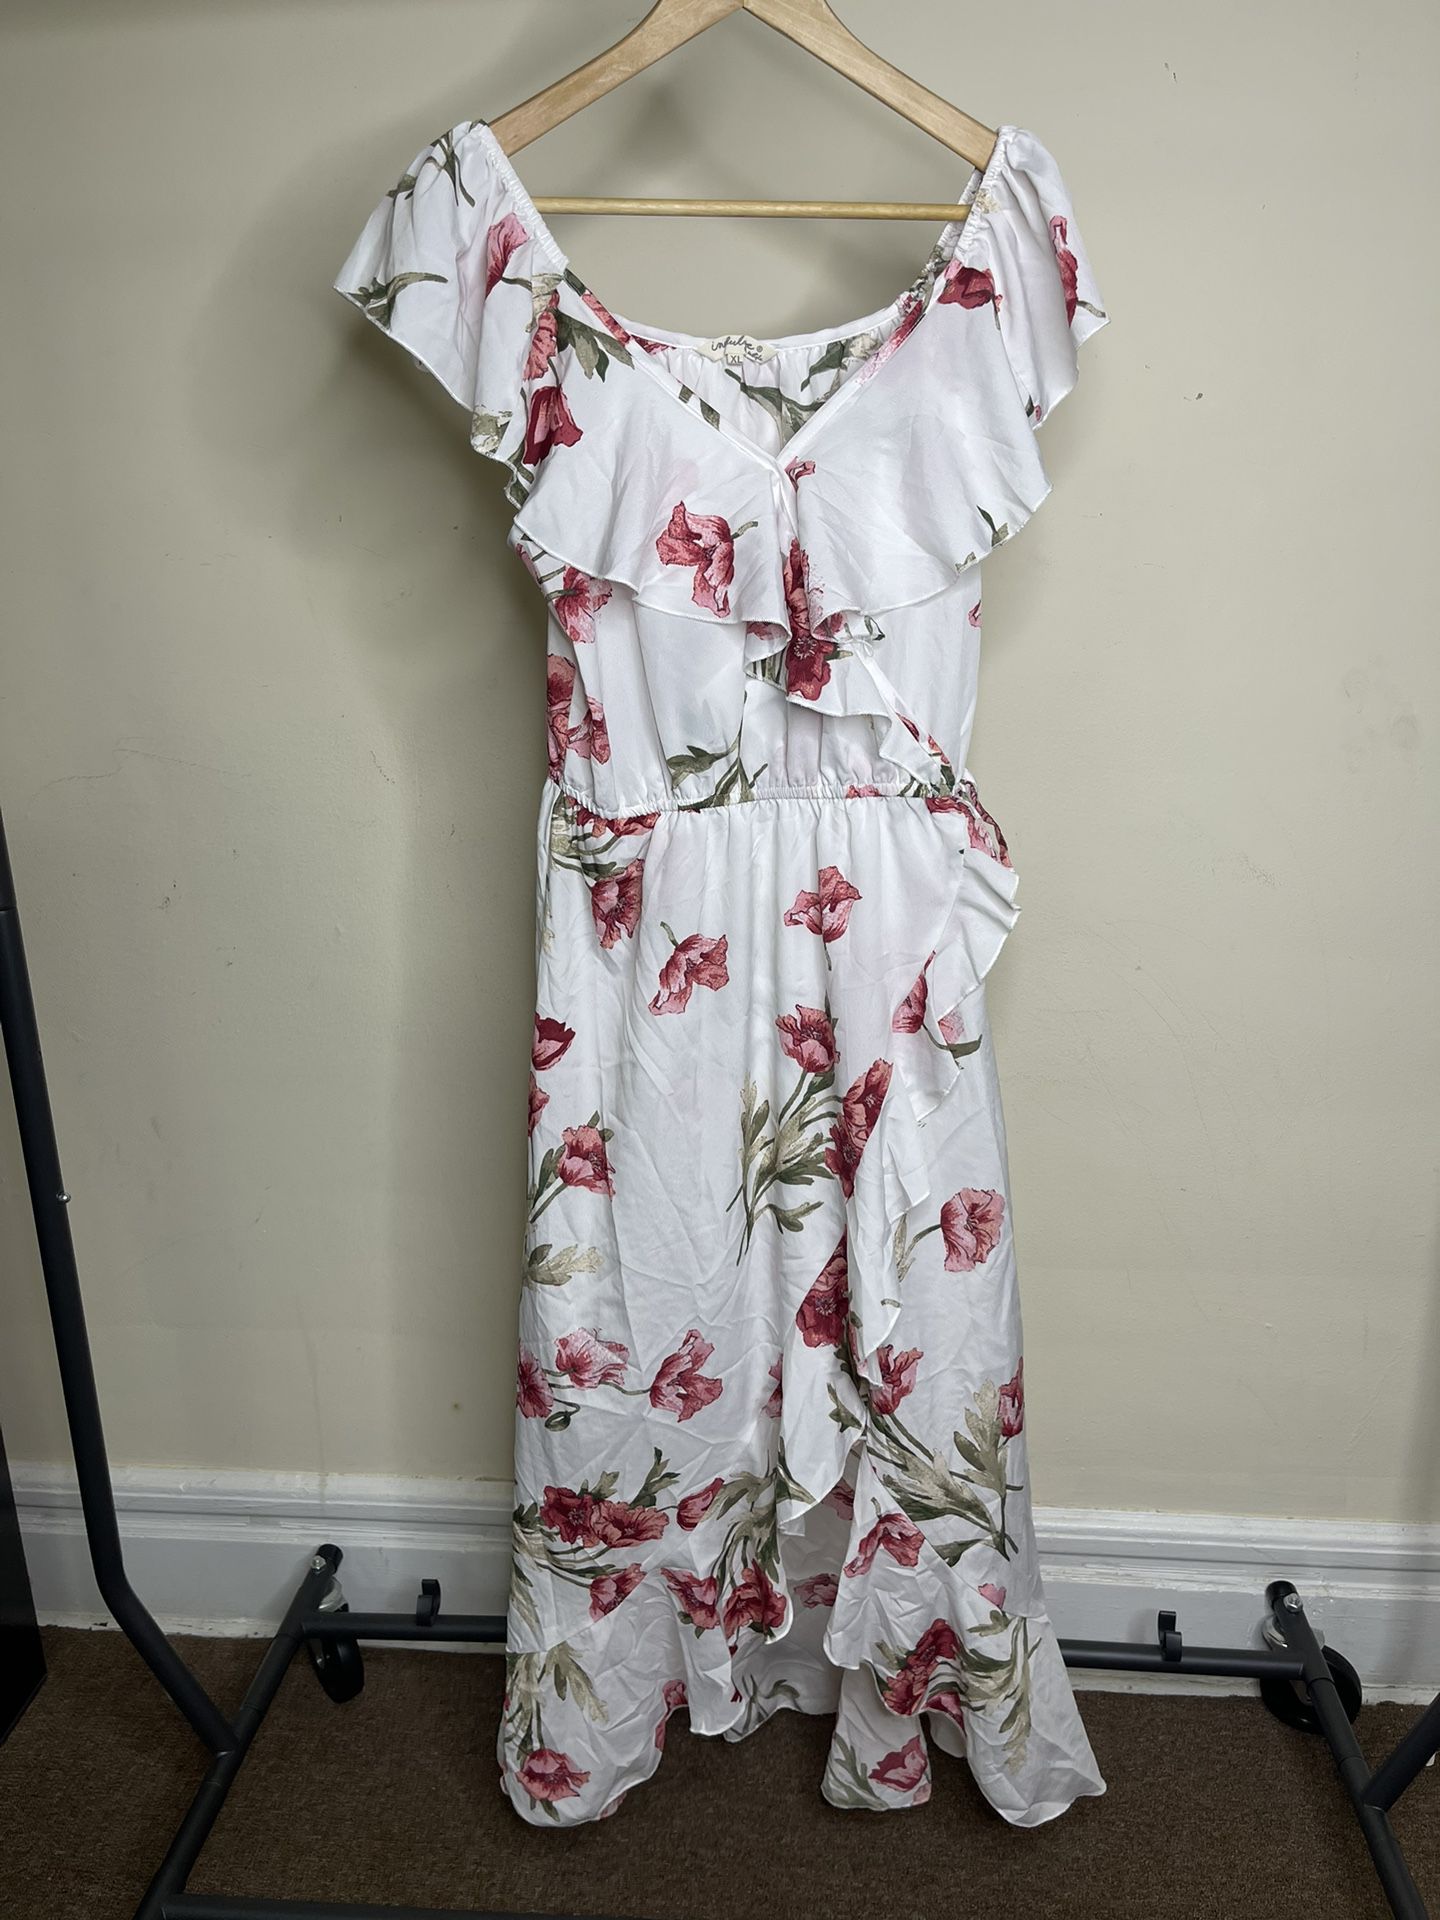 Women’s Floral Sundress by Indulge